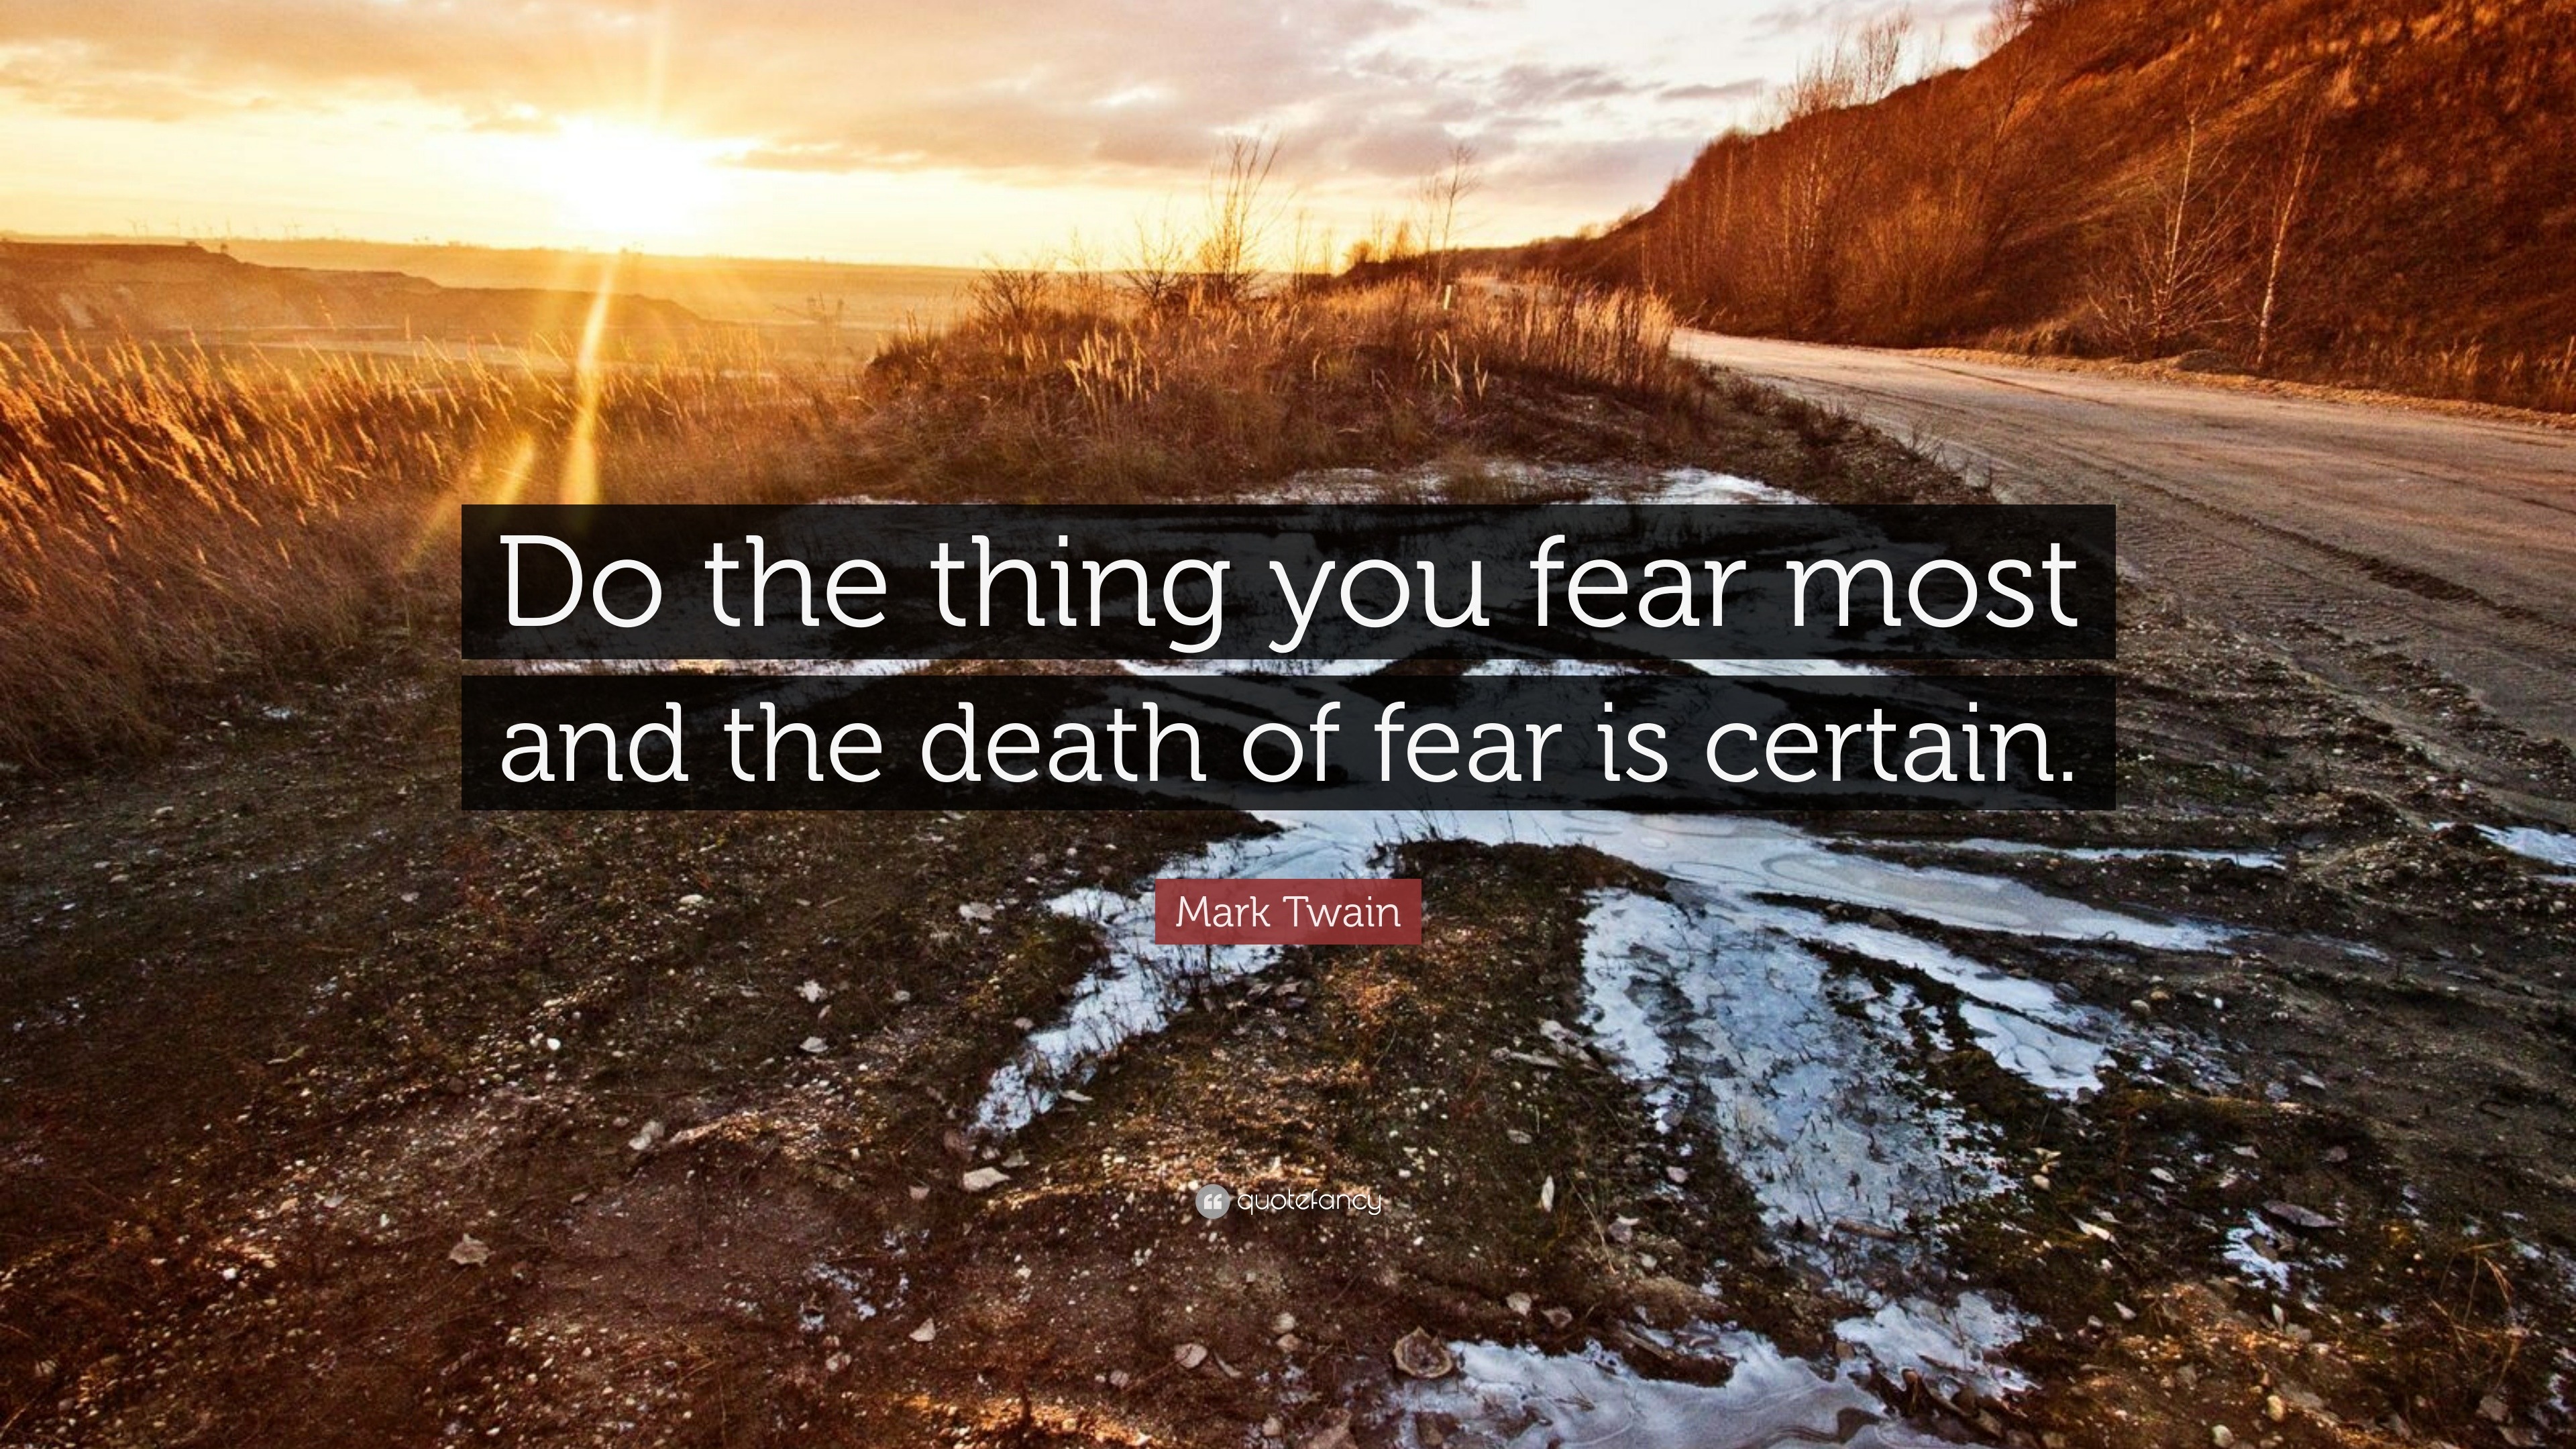 Mark Twain Quote Do The Thing You Fear Most And The Death Of Fear Is Certain